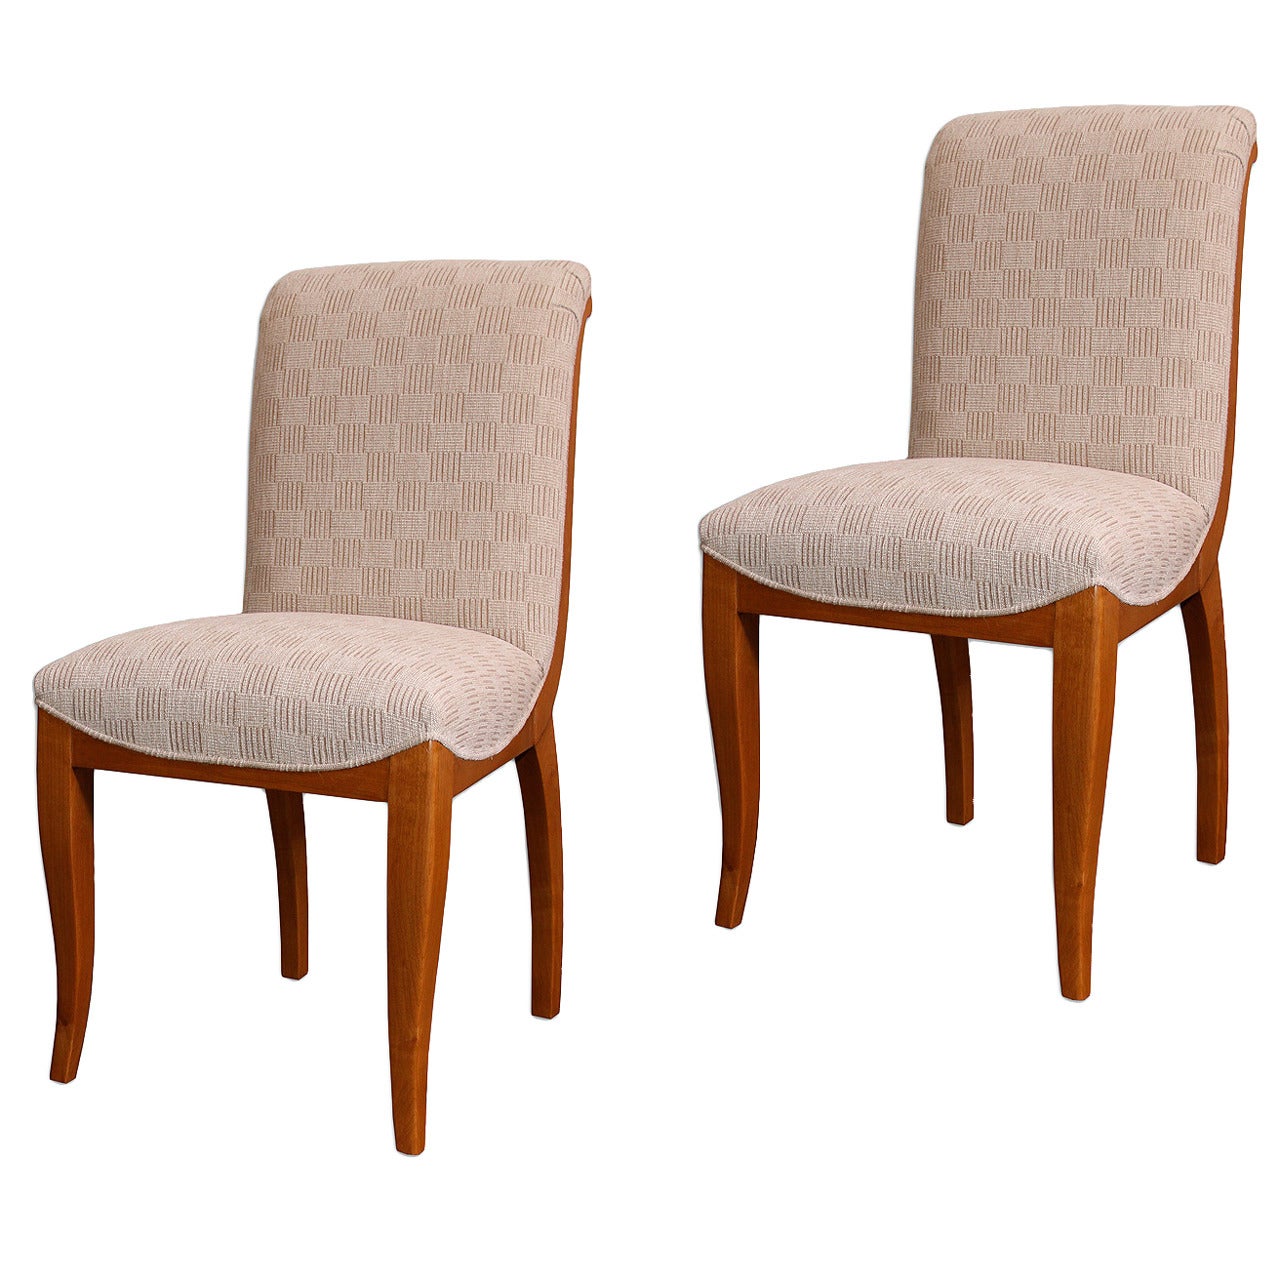 Pair of Chairs, France, 1940